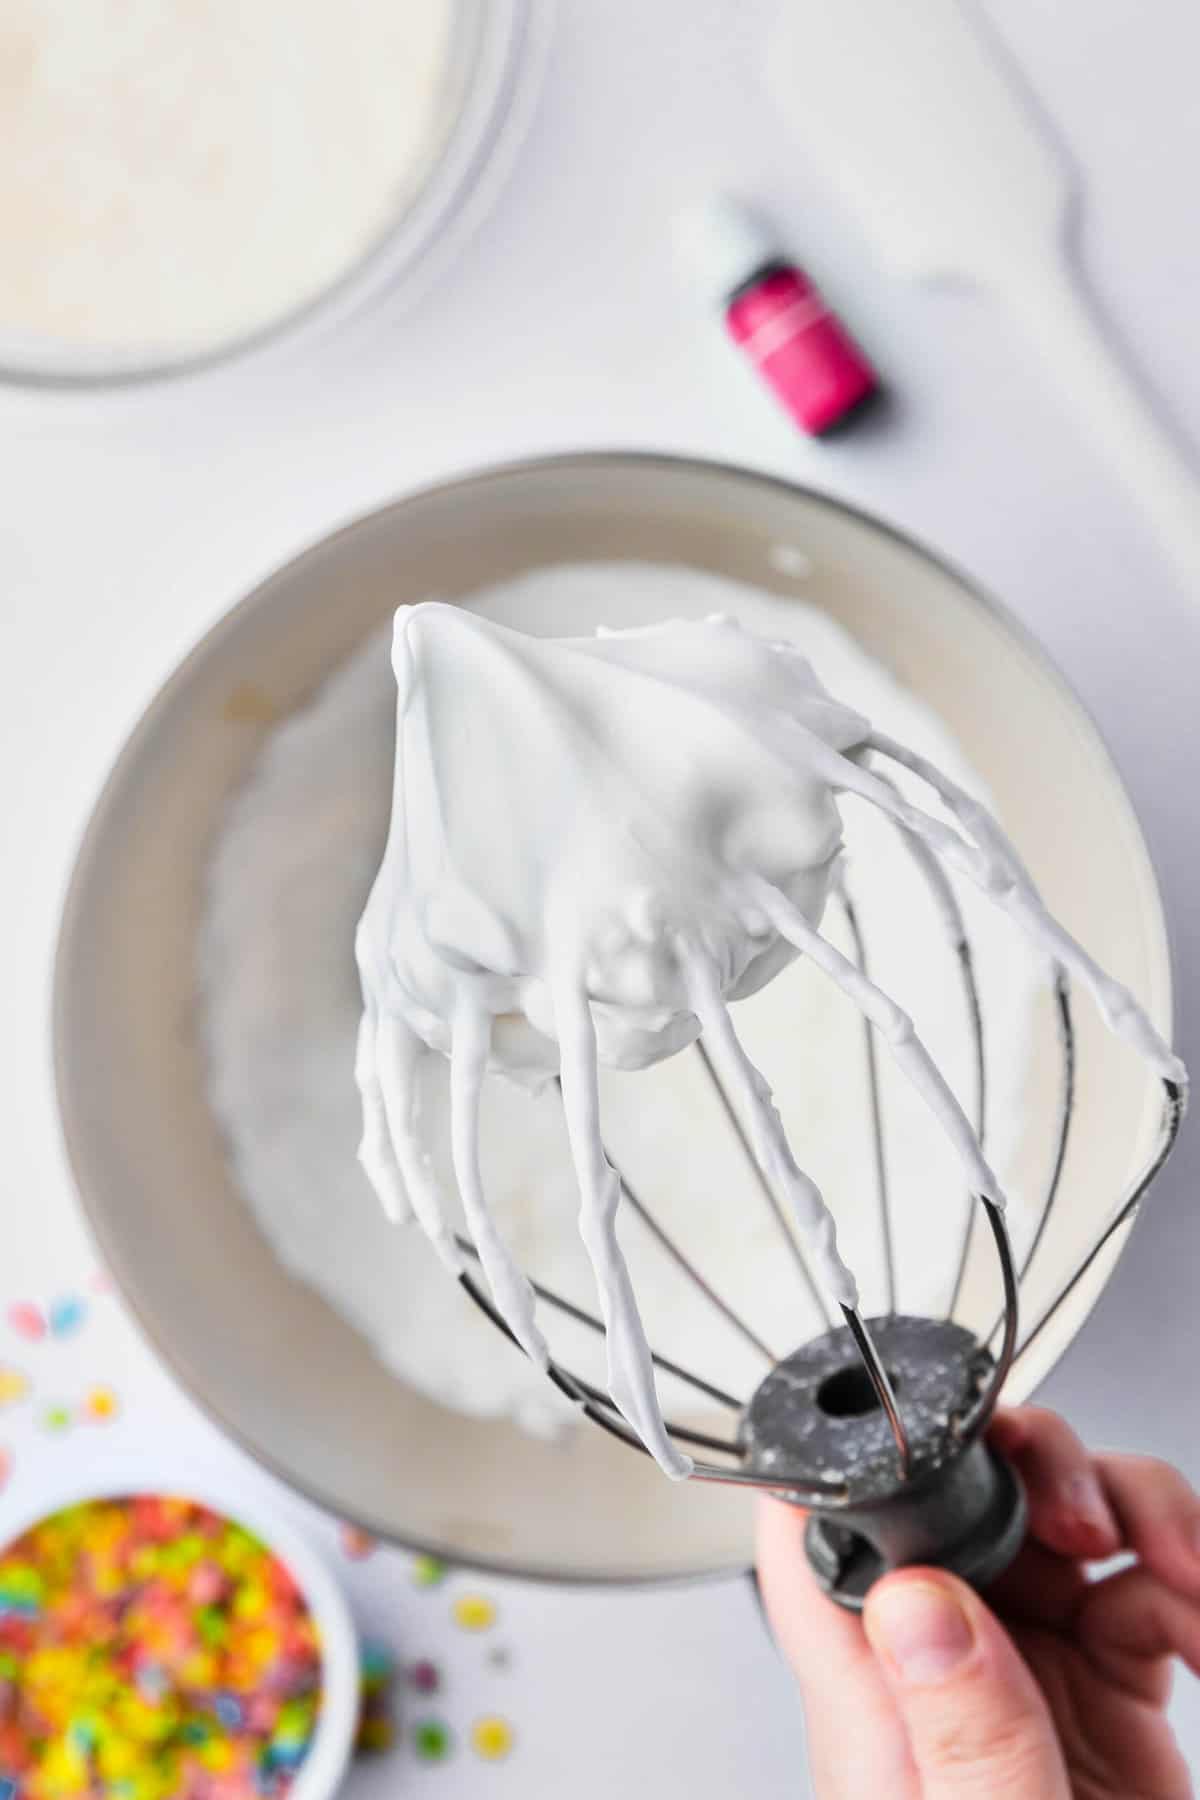 A whisk attachment holding up egg whites that have been whipped to stiff peaks.